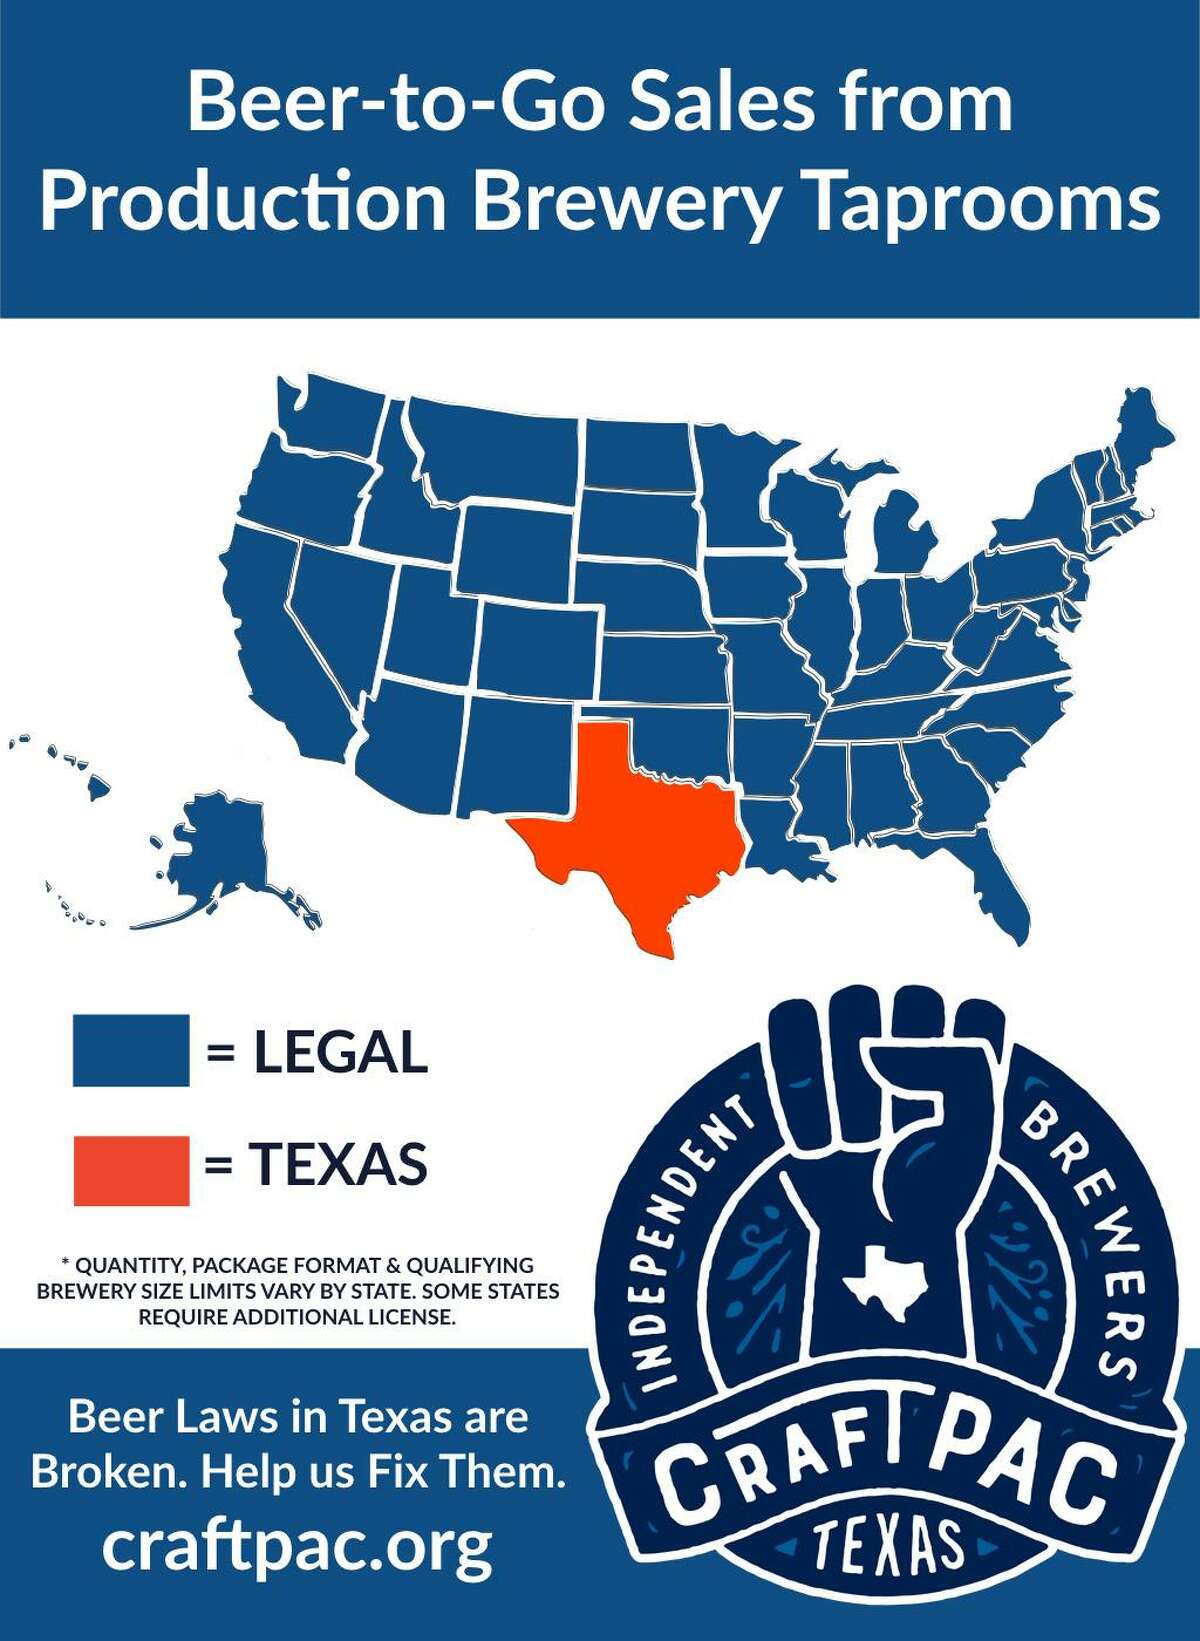 This graphic highlights one of the laws that CraftPAC, a new political action committee formed by the Texas Craft Brewers Guild, intends to change. Texas stands alone in not allowing breweries to sell beer to-go from their tap rooms.